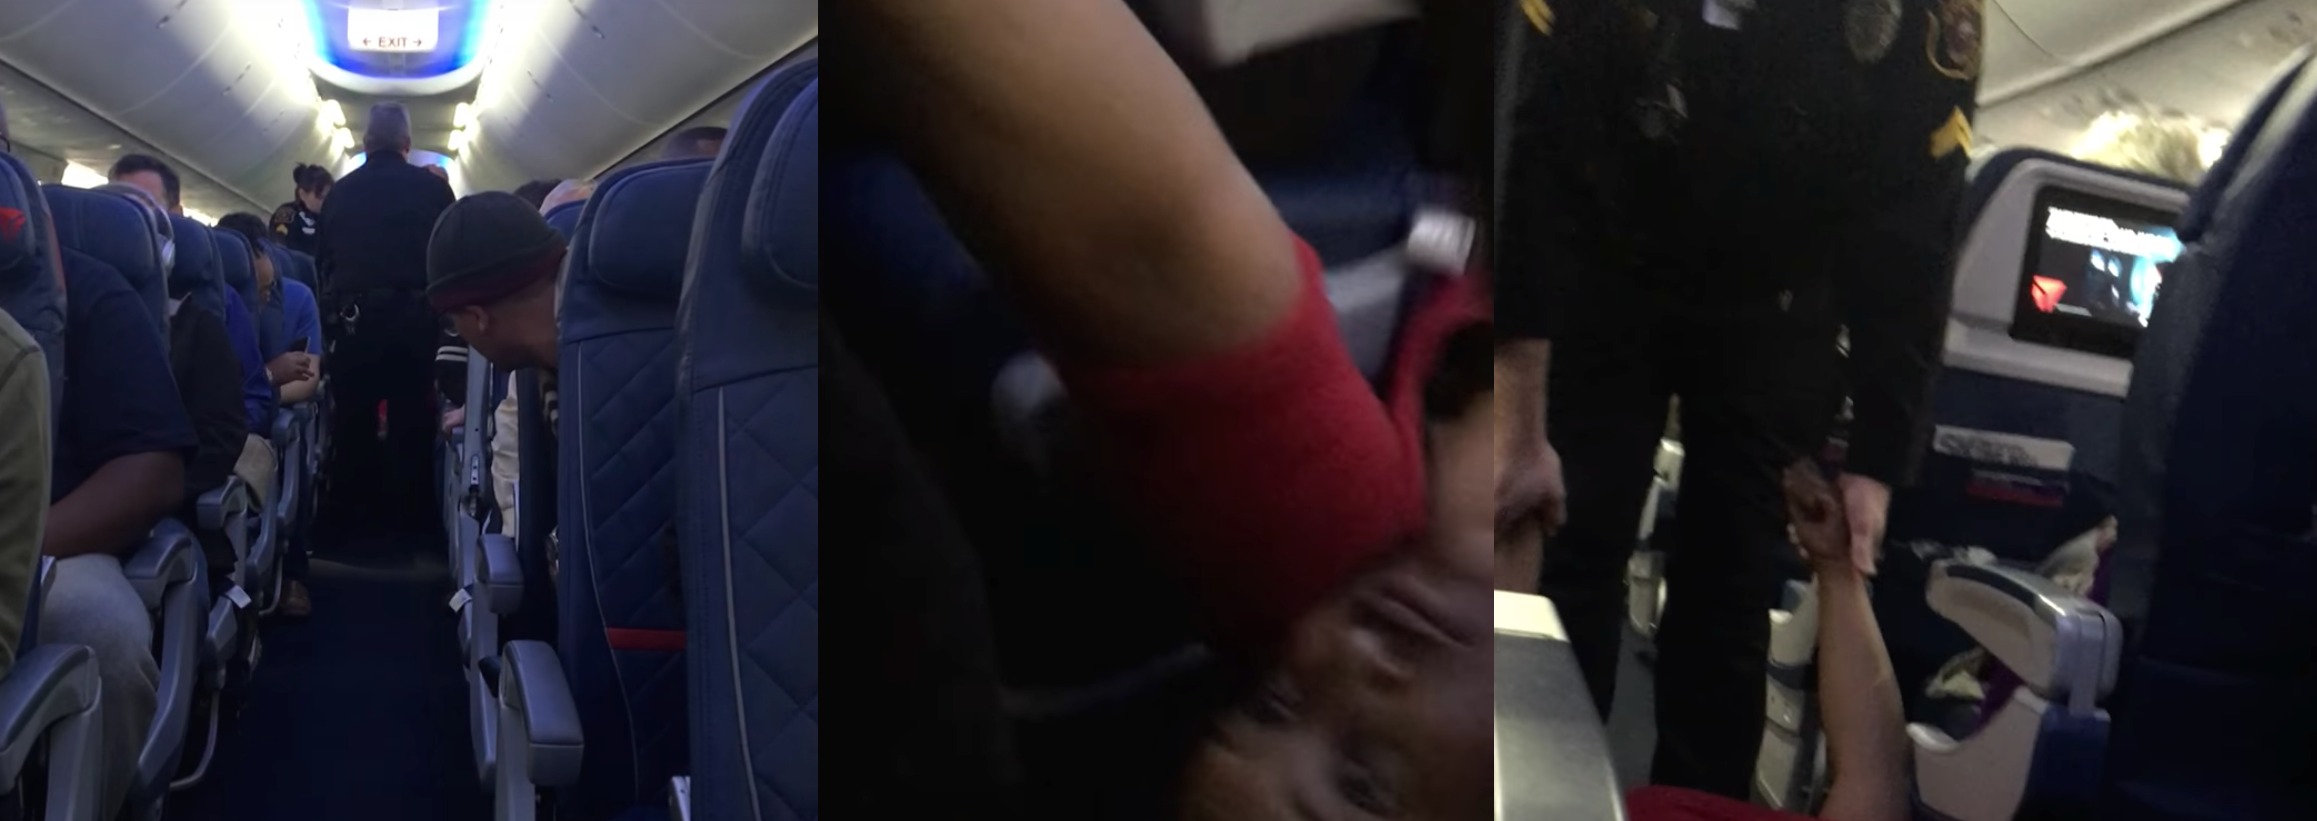 Police Physically Drag Passenger Off Delta Flight After She Refused To Leave Plane